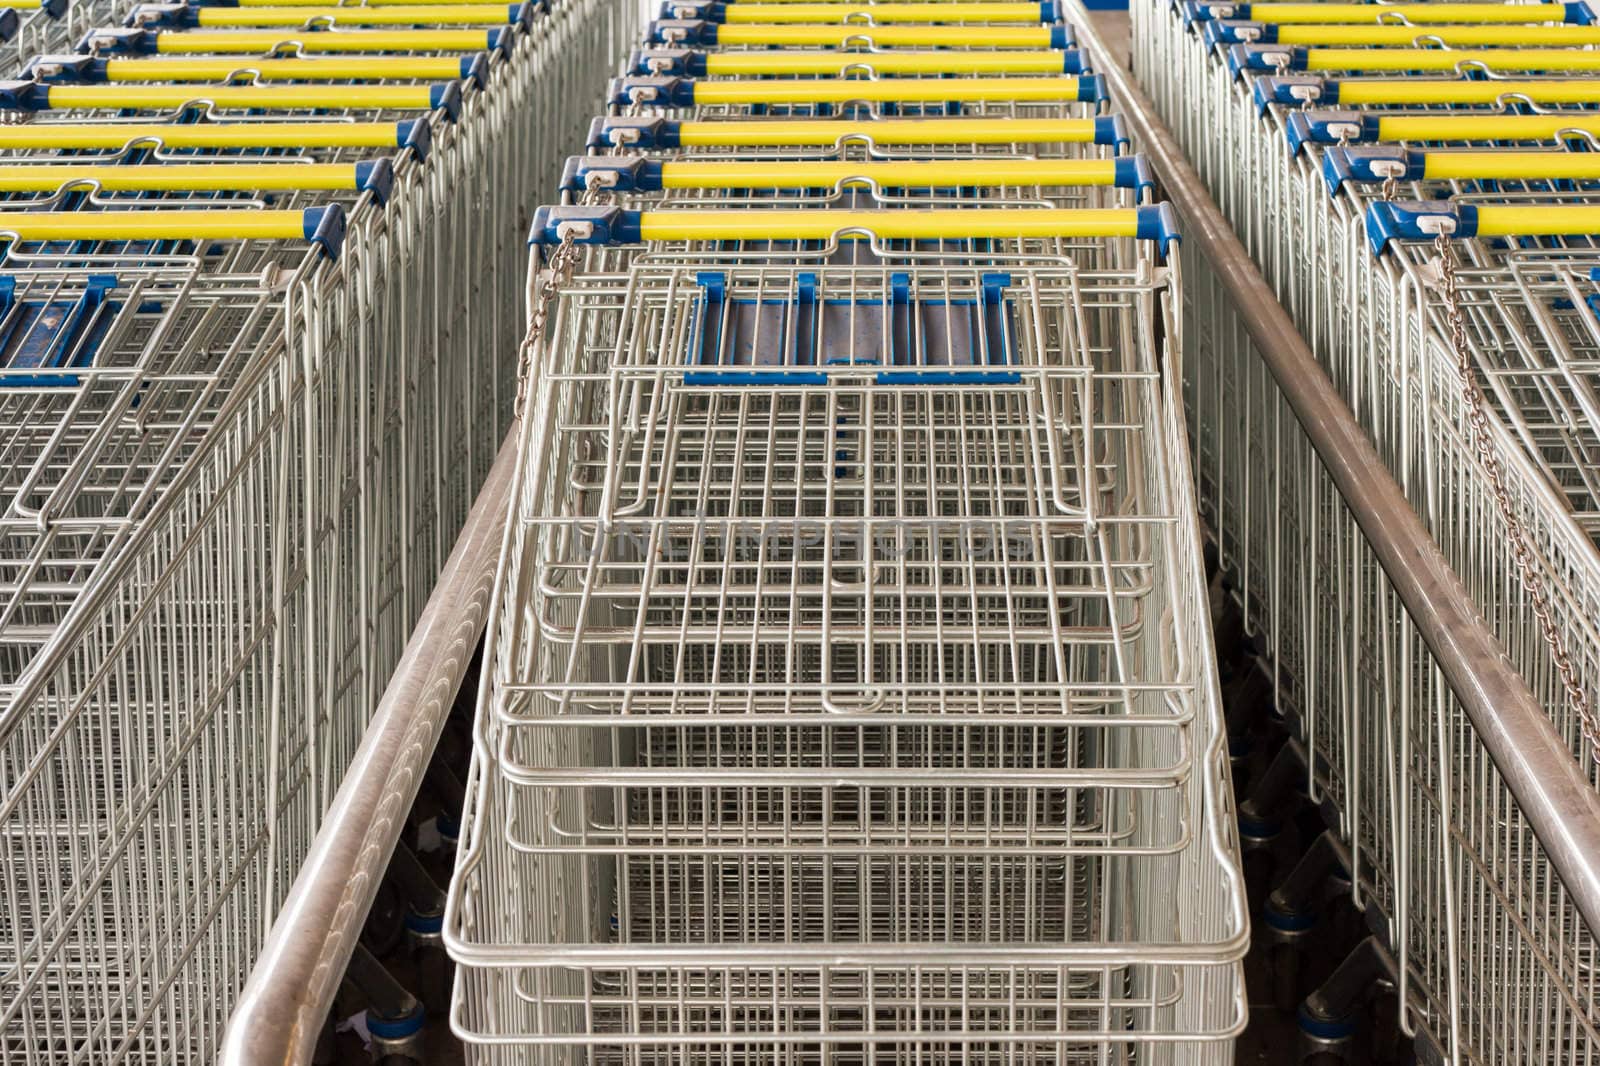 Rows of lined-up Shopping Carts by PiLens